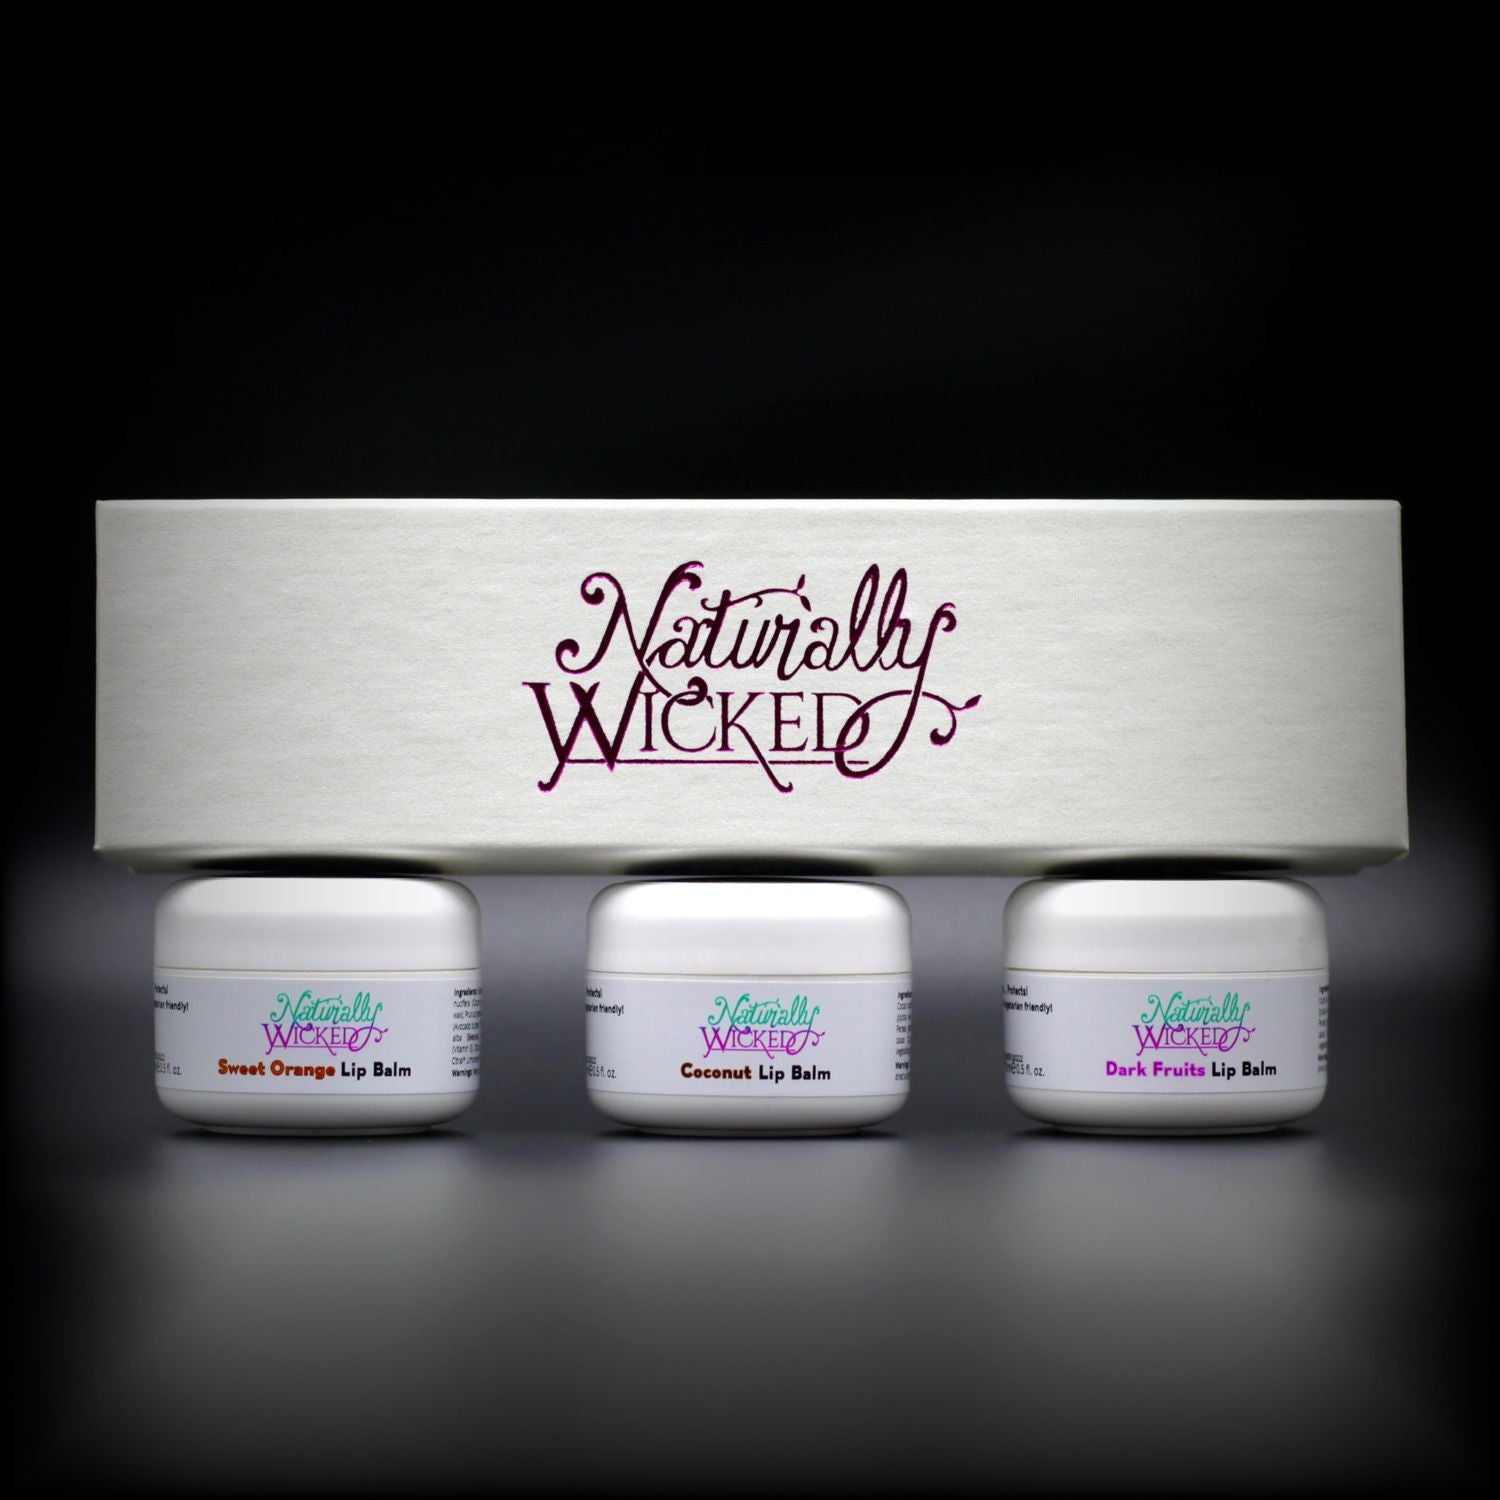 Naturally Wicked Lip Balm Trio Box On Top Of 3 Luxury Fruit Filled White Lip Balm Containers; Coconut, Dark Fruits & Sweet Orange